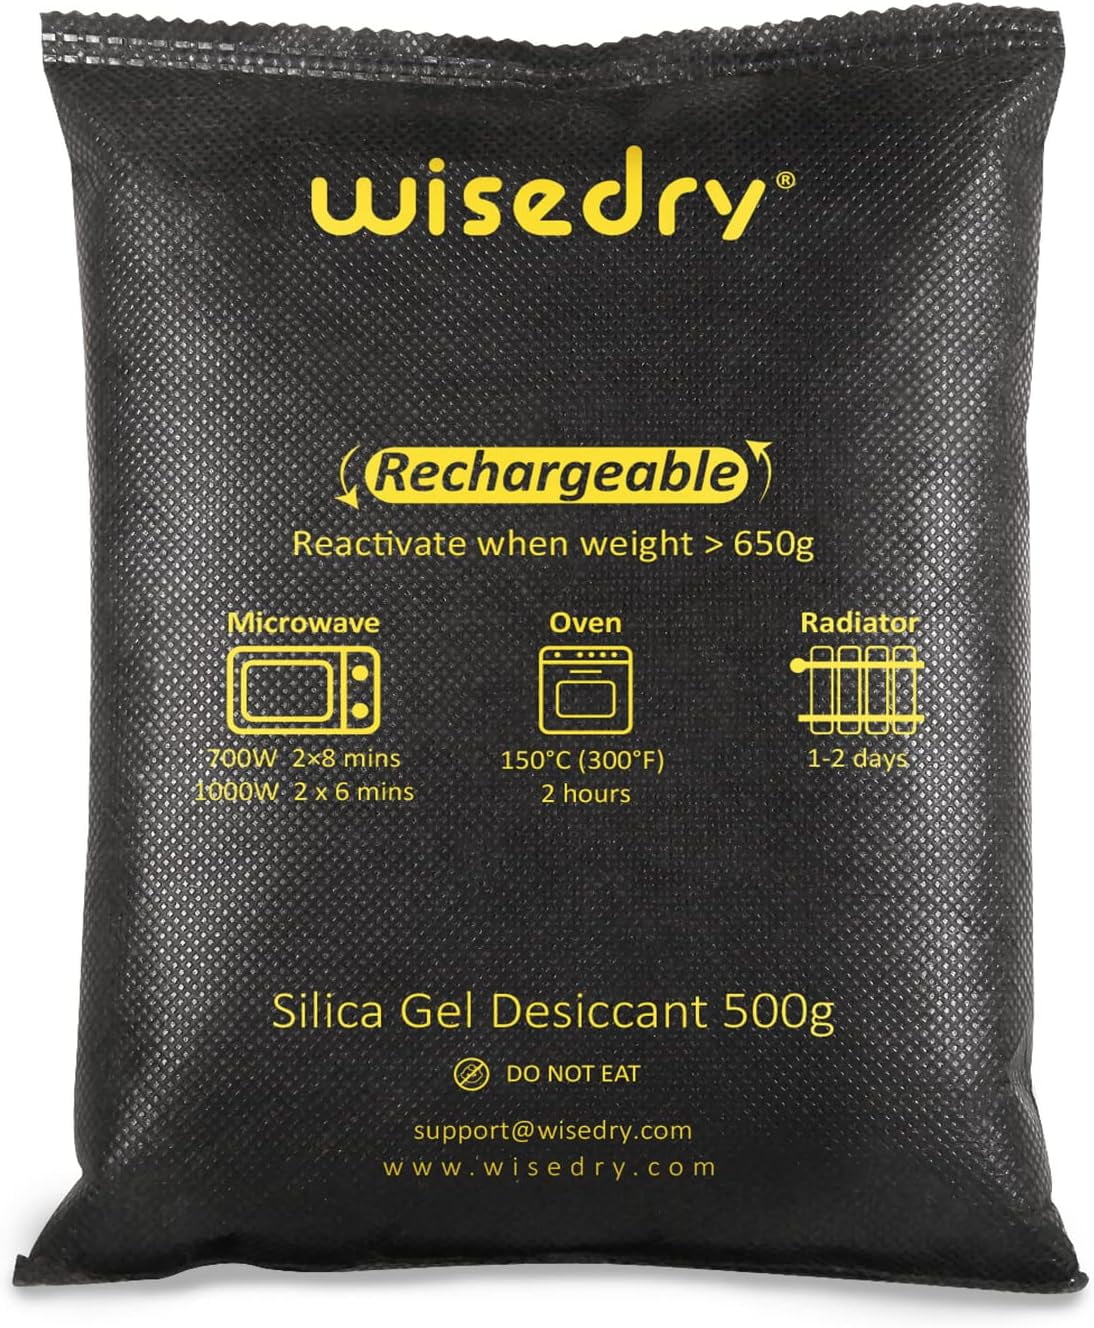 Compare prices for wisedry across all European  stores